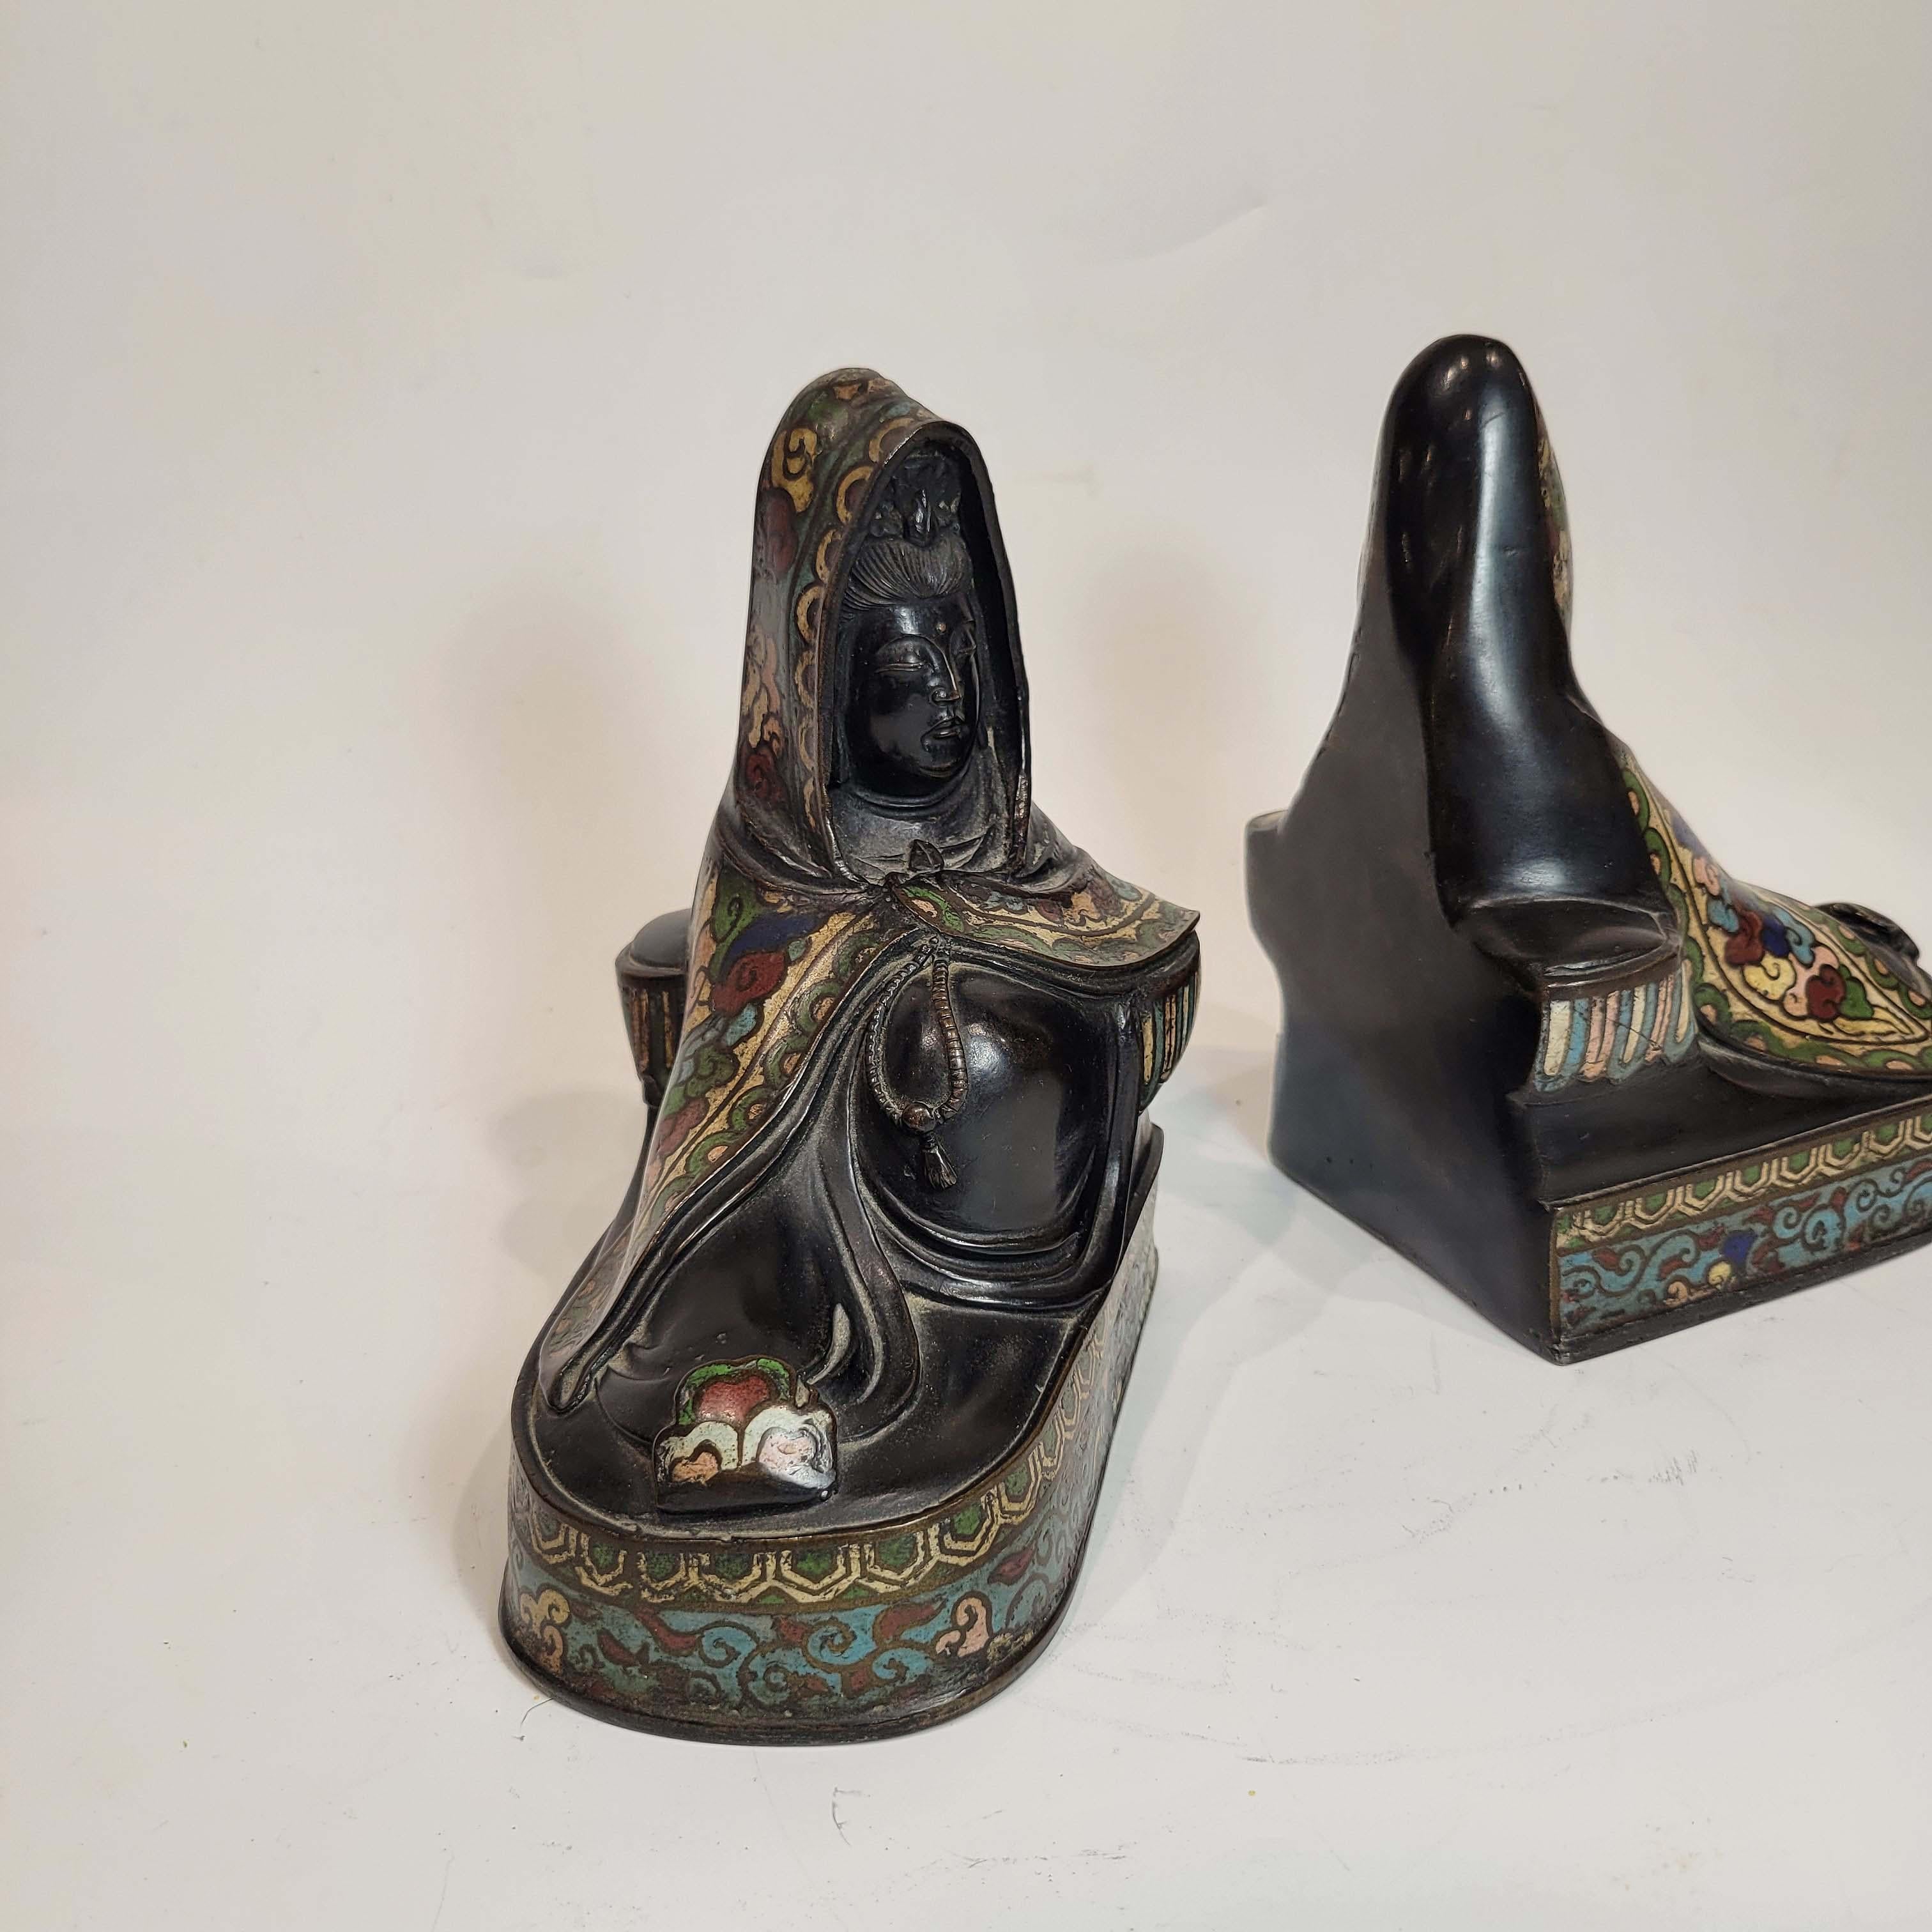 Rare pair of Japanese Clisonne and patinated Bronze Buudha bookends, Meiji period, late 19th, early 20th century.
Each beautifully cast and with excuisite details.
The Meiji Period in Japan (1868-1912).